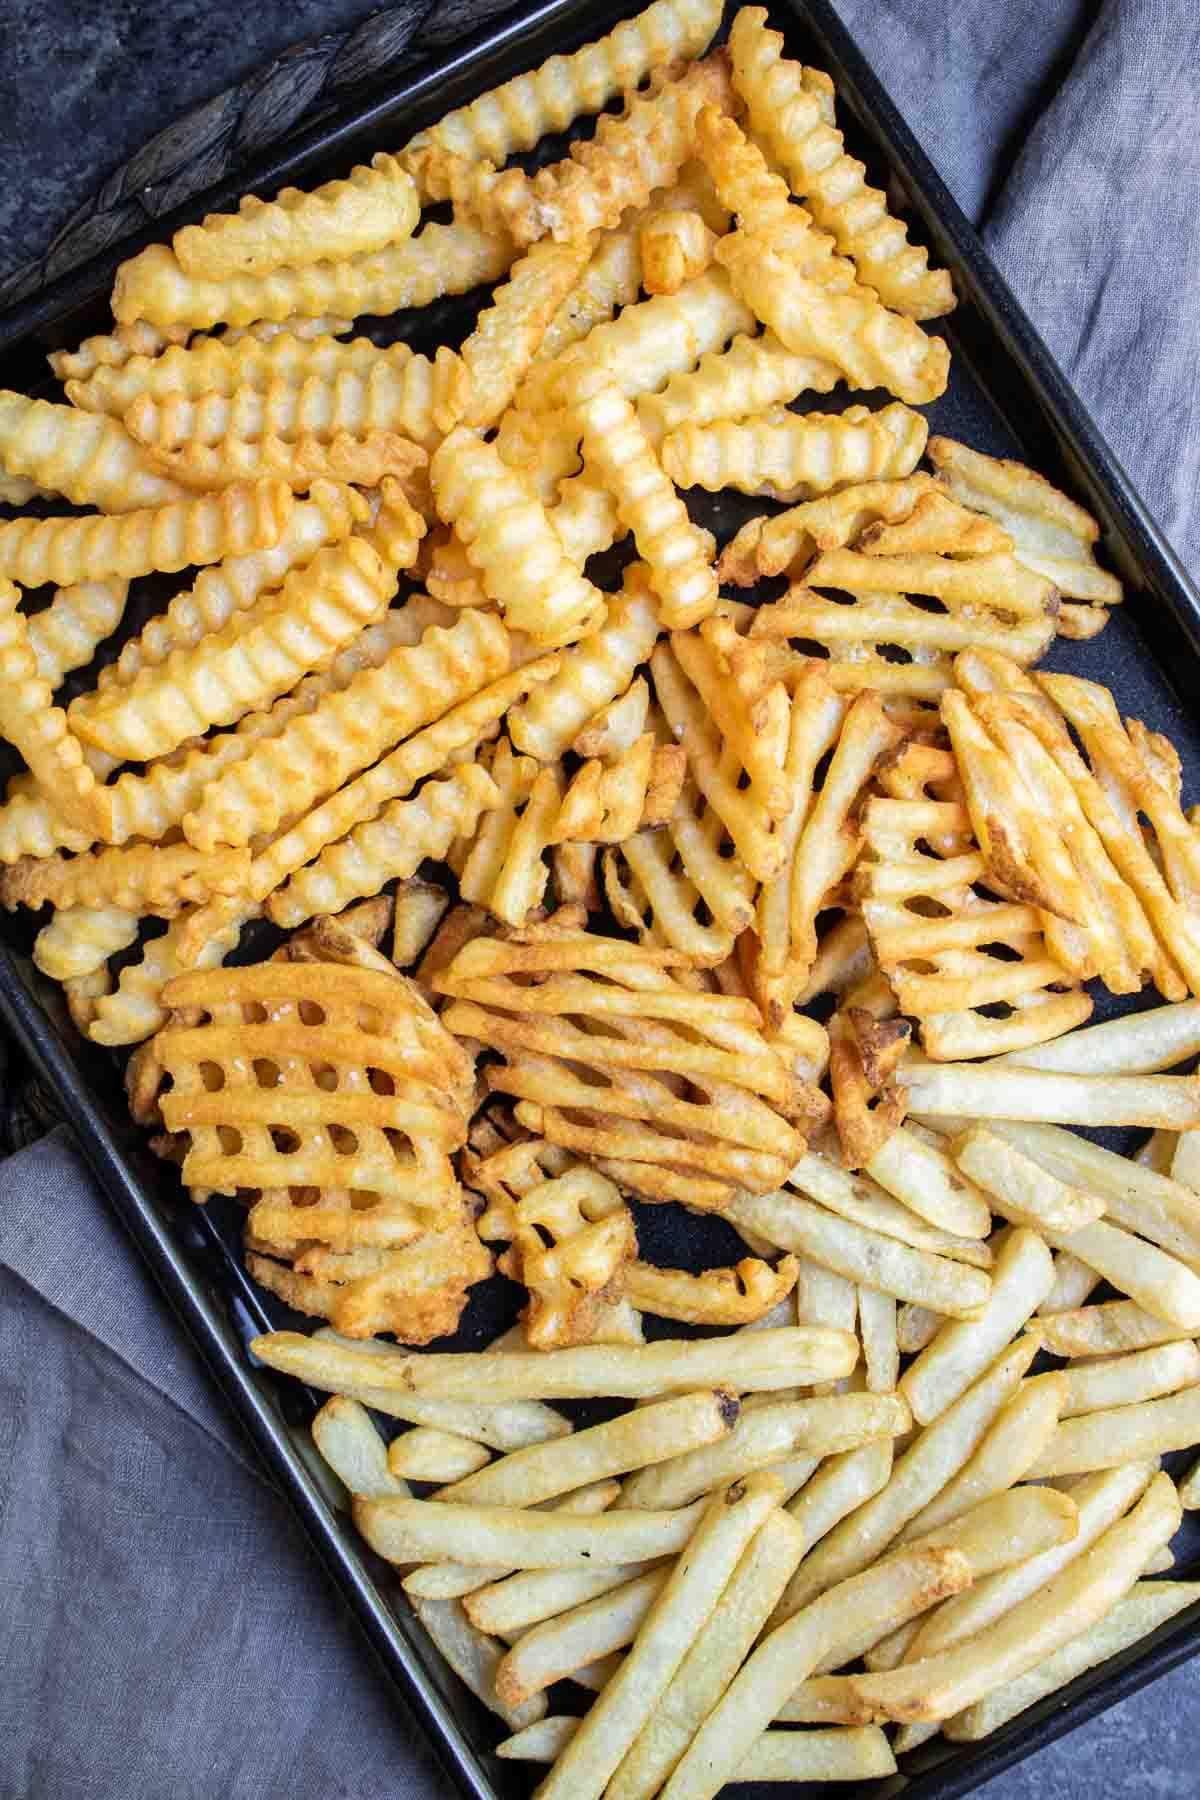 Black sheet pan of different types of Air Fryer Frozen French Fries